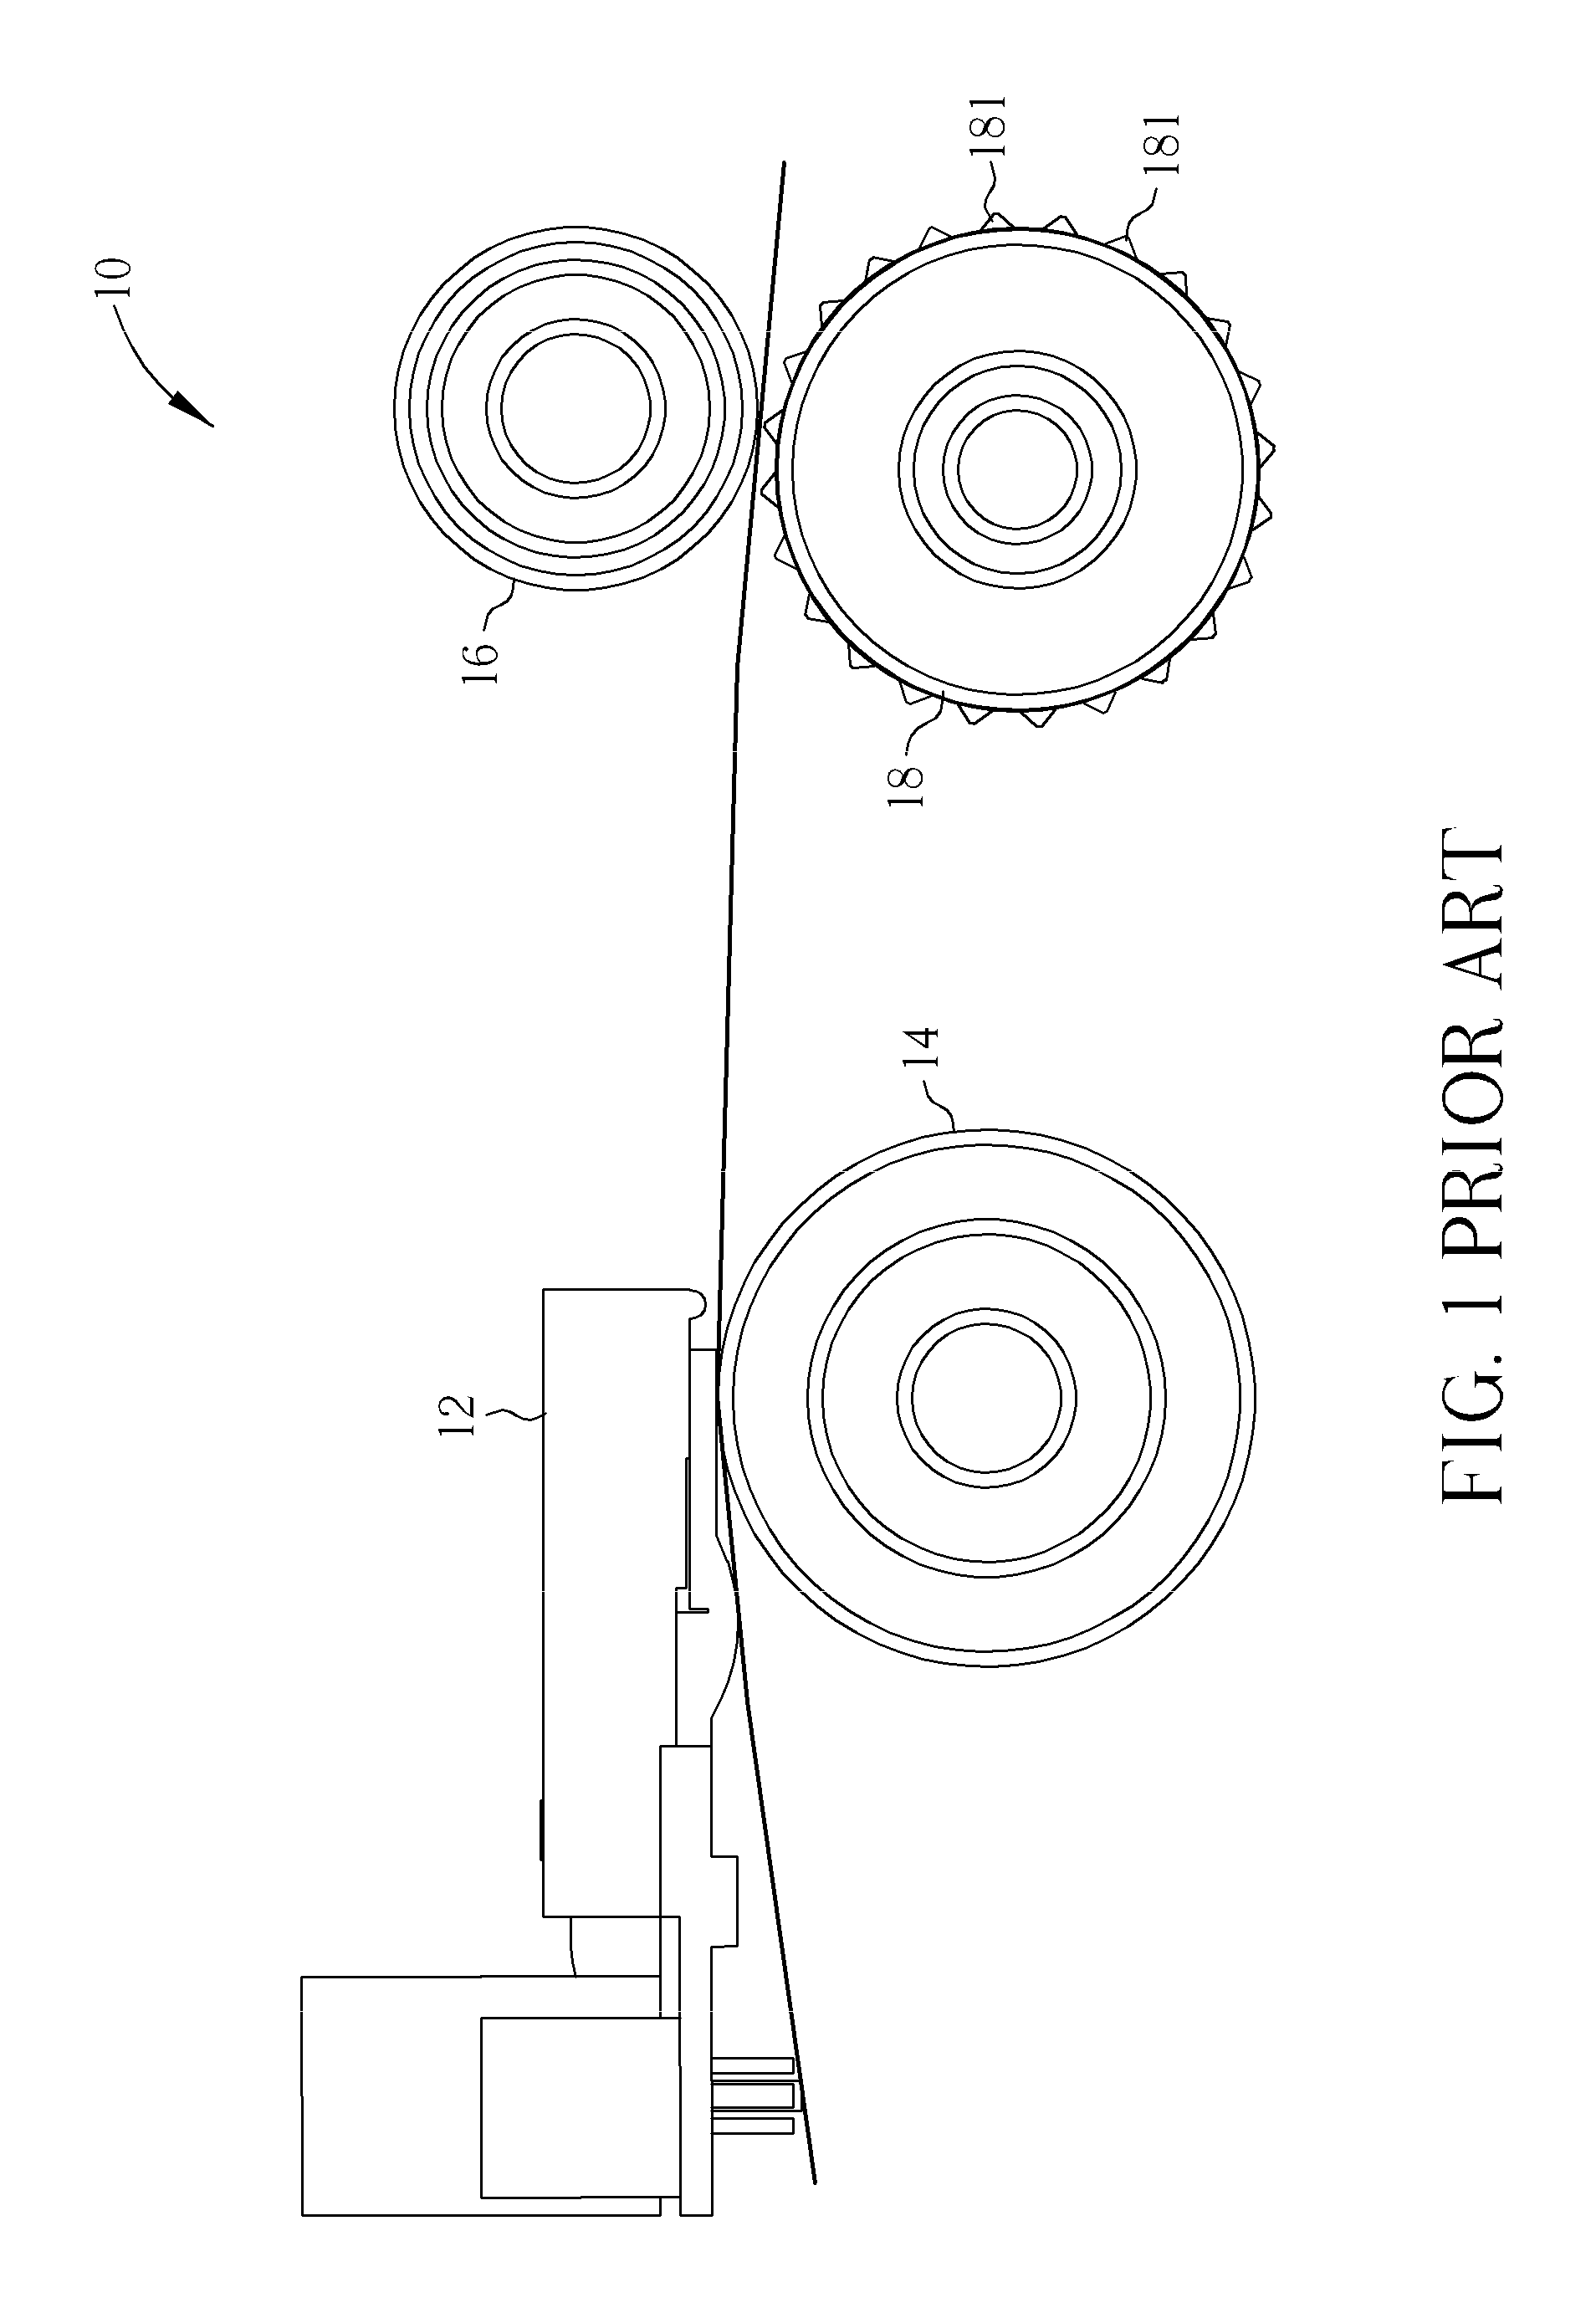 Clamp mechanism and related printer